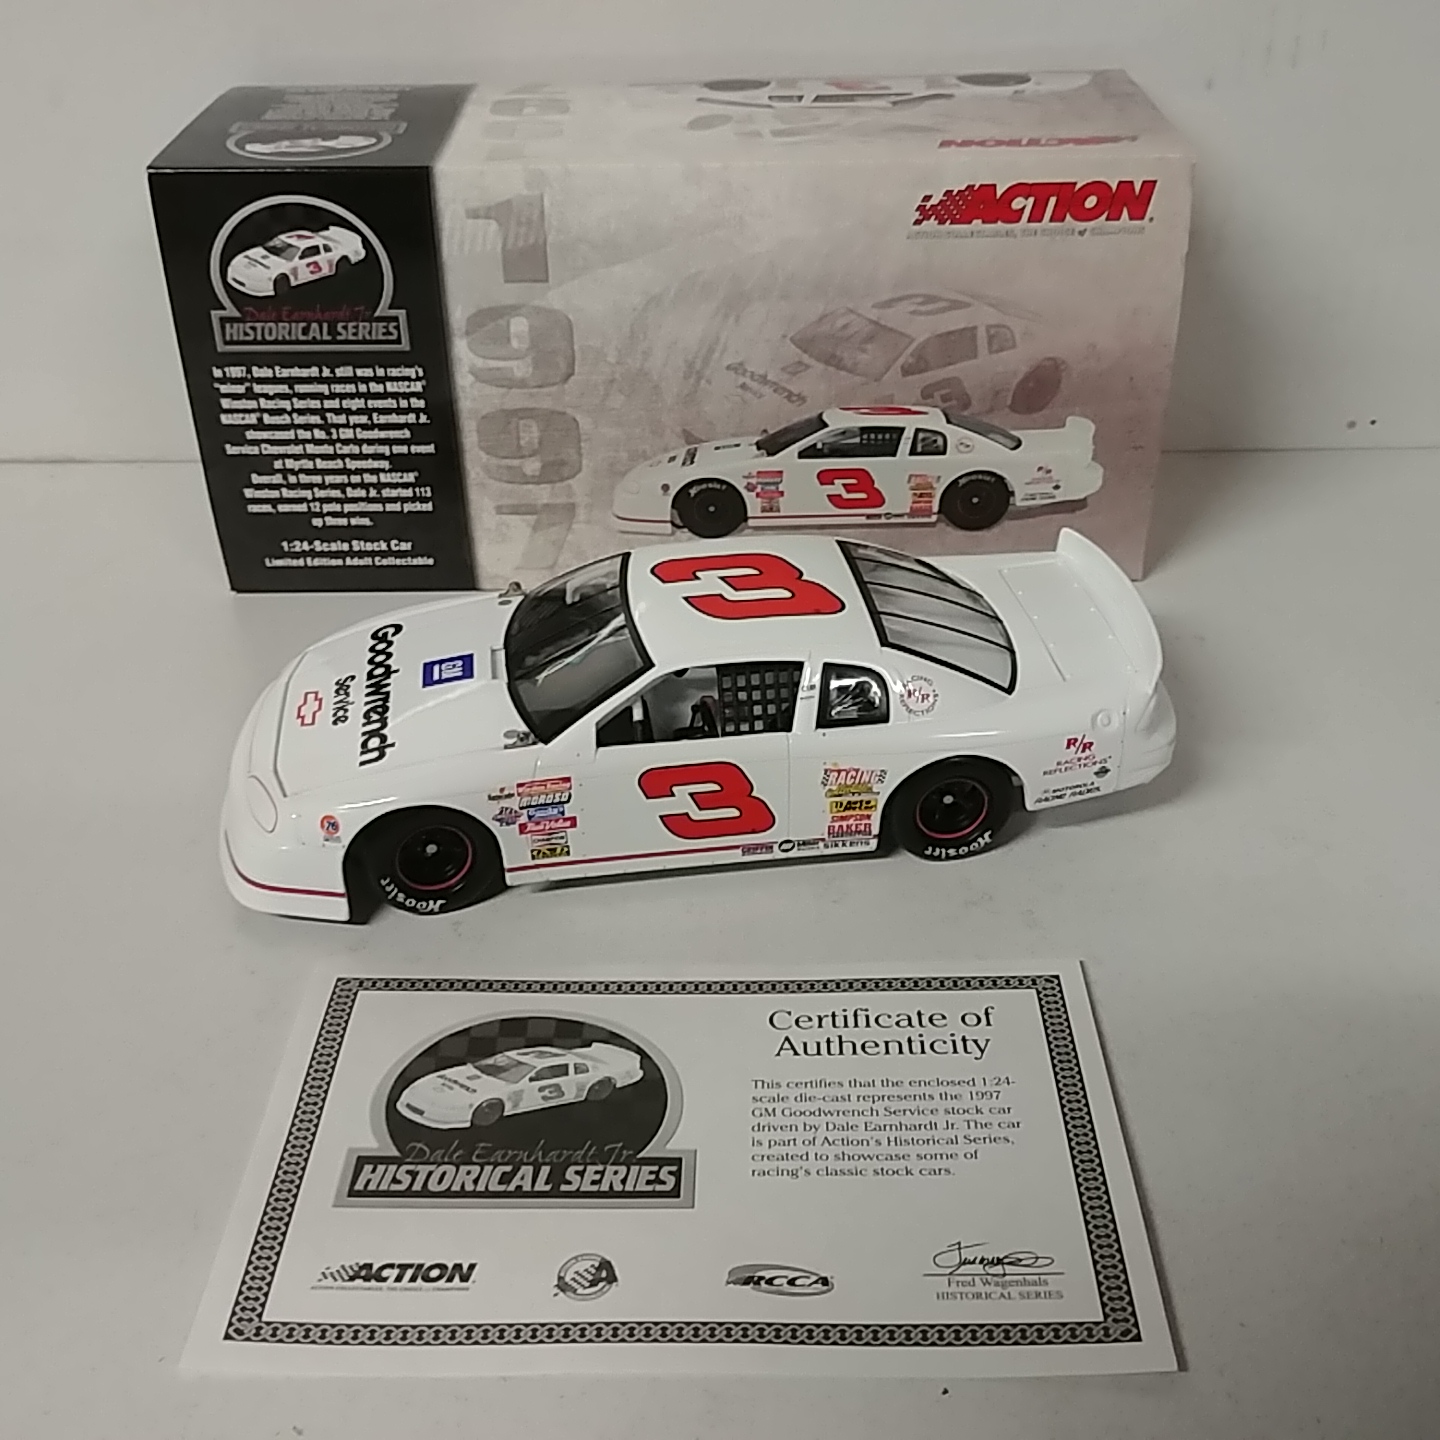 1997 Dale Earnhardt Jr 1/24th Goodwrench Late Model Stock c/w car